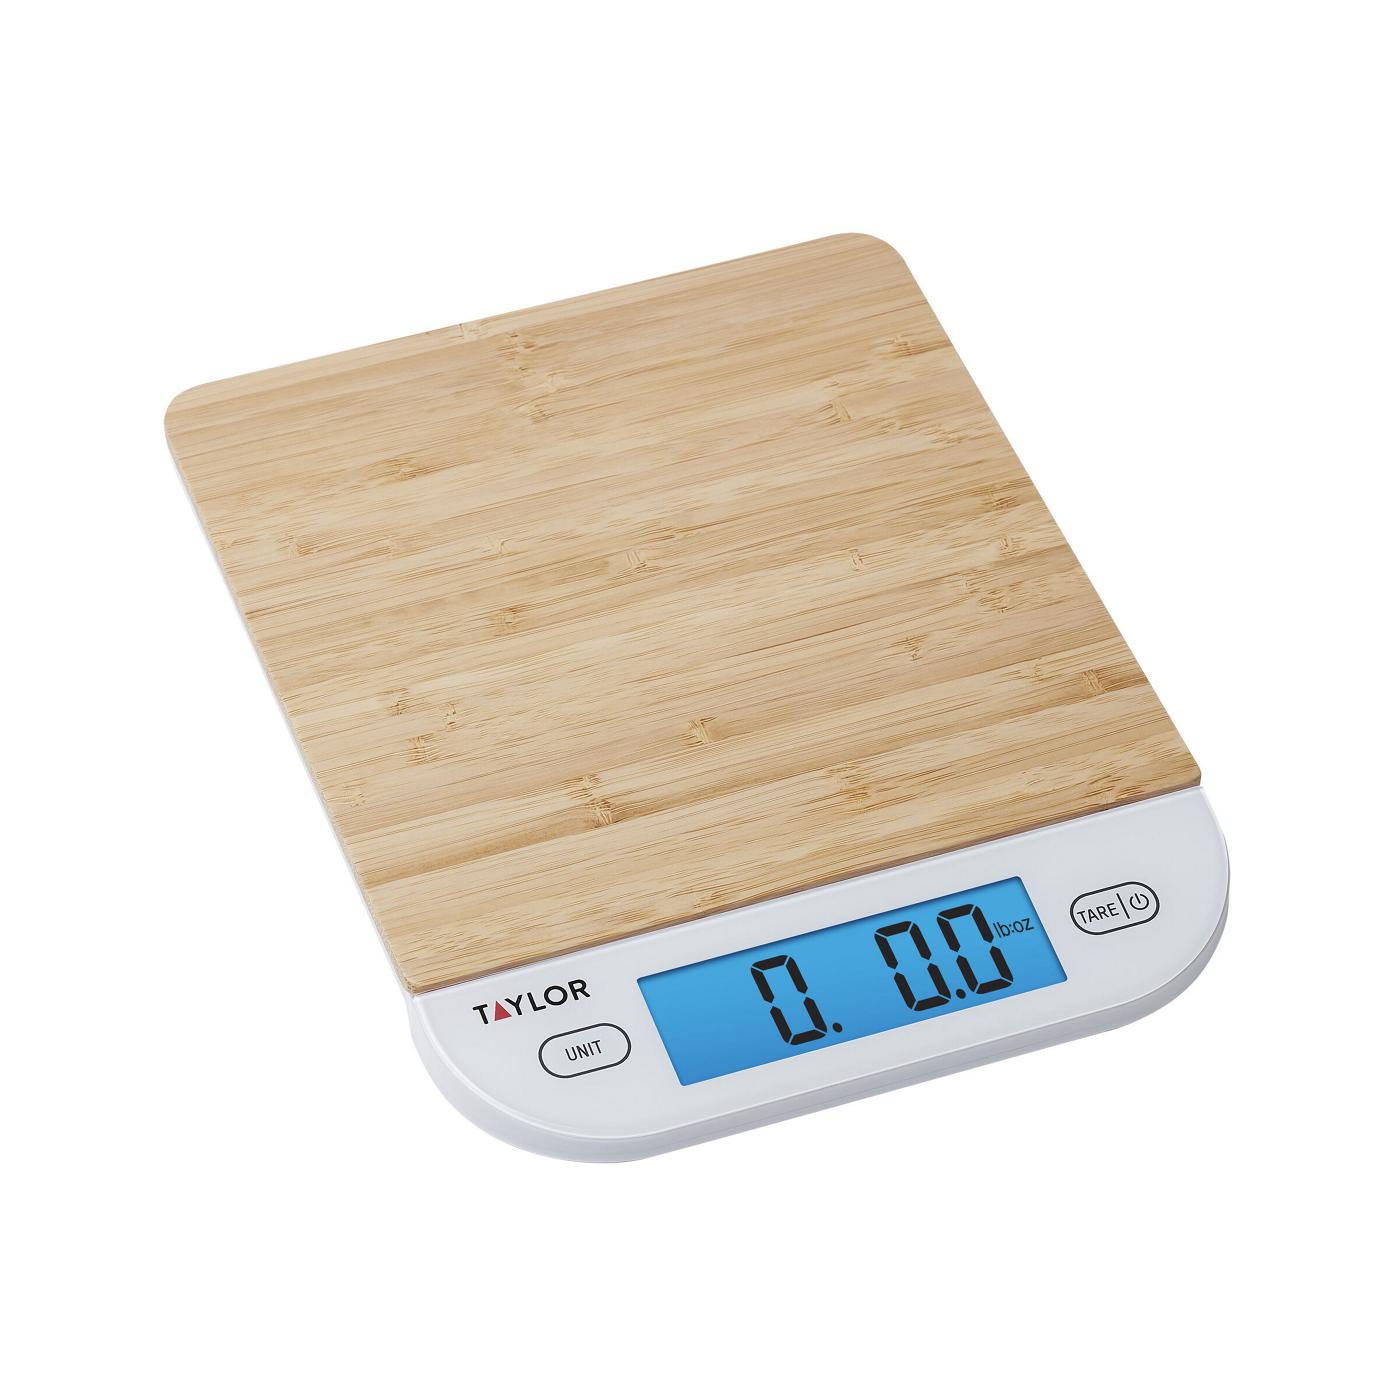 Taylor Bamboo Digital Kitchen Scale; image 3 of 3